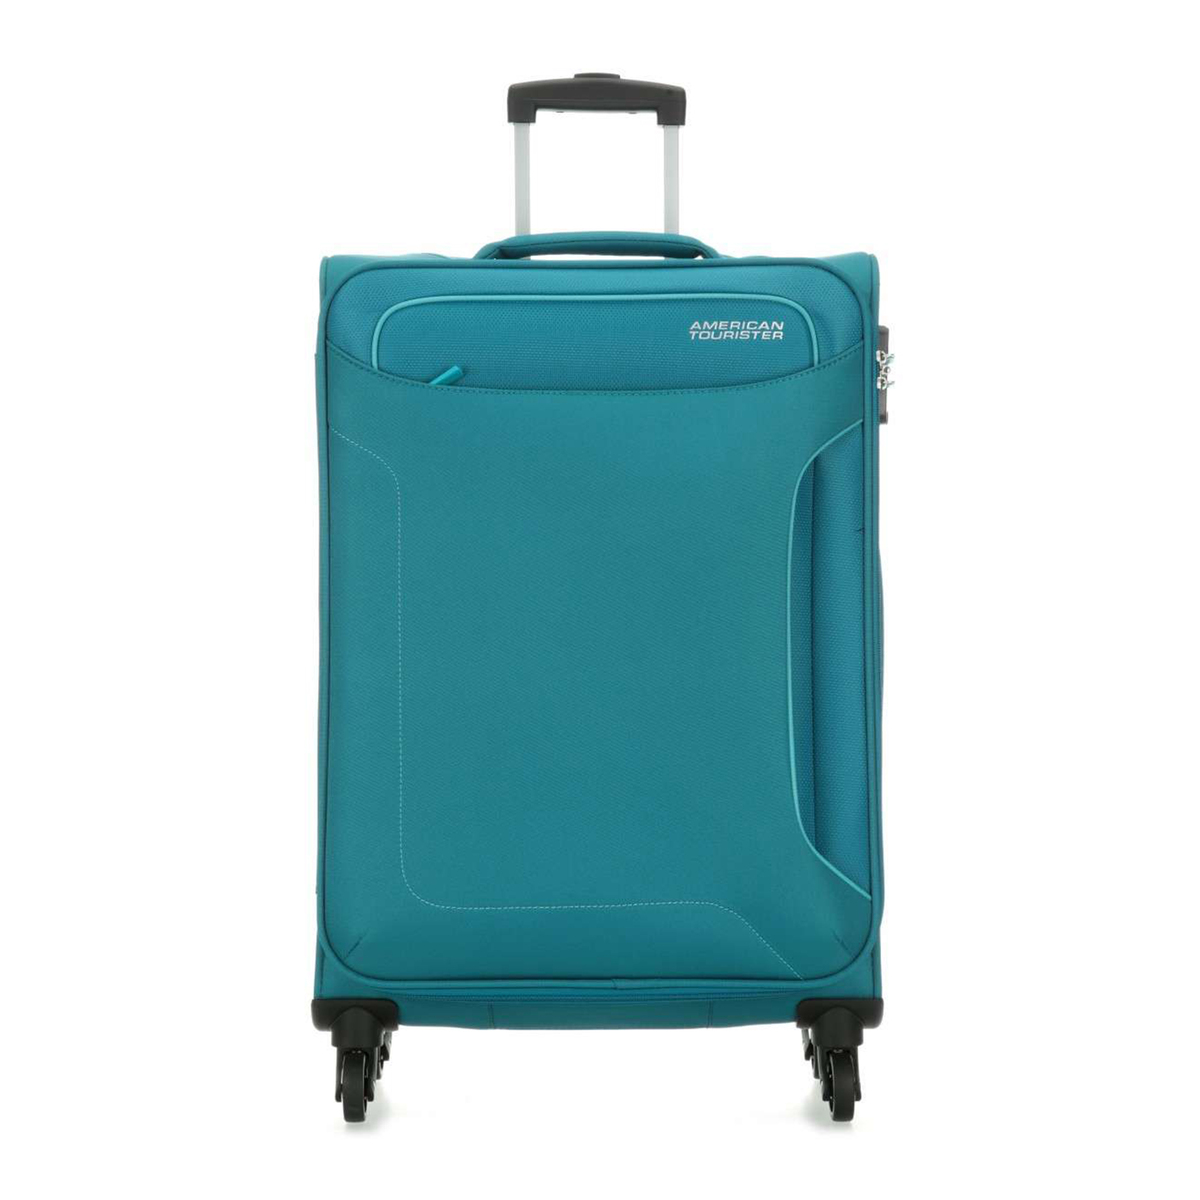 American Tourister Holiday 4 Wheel Soft Trolley, 68 cm, Teal